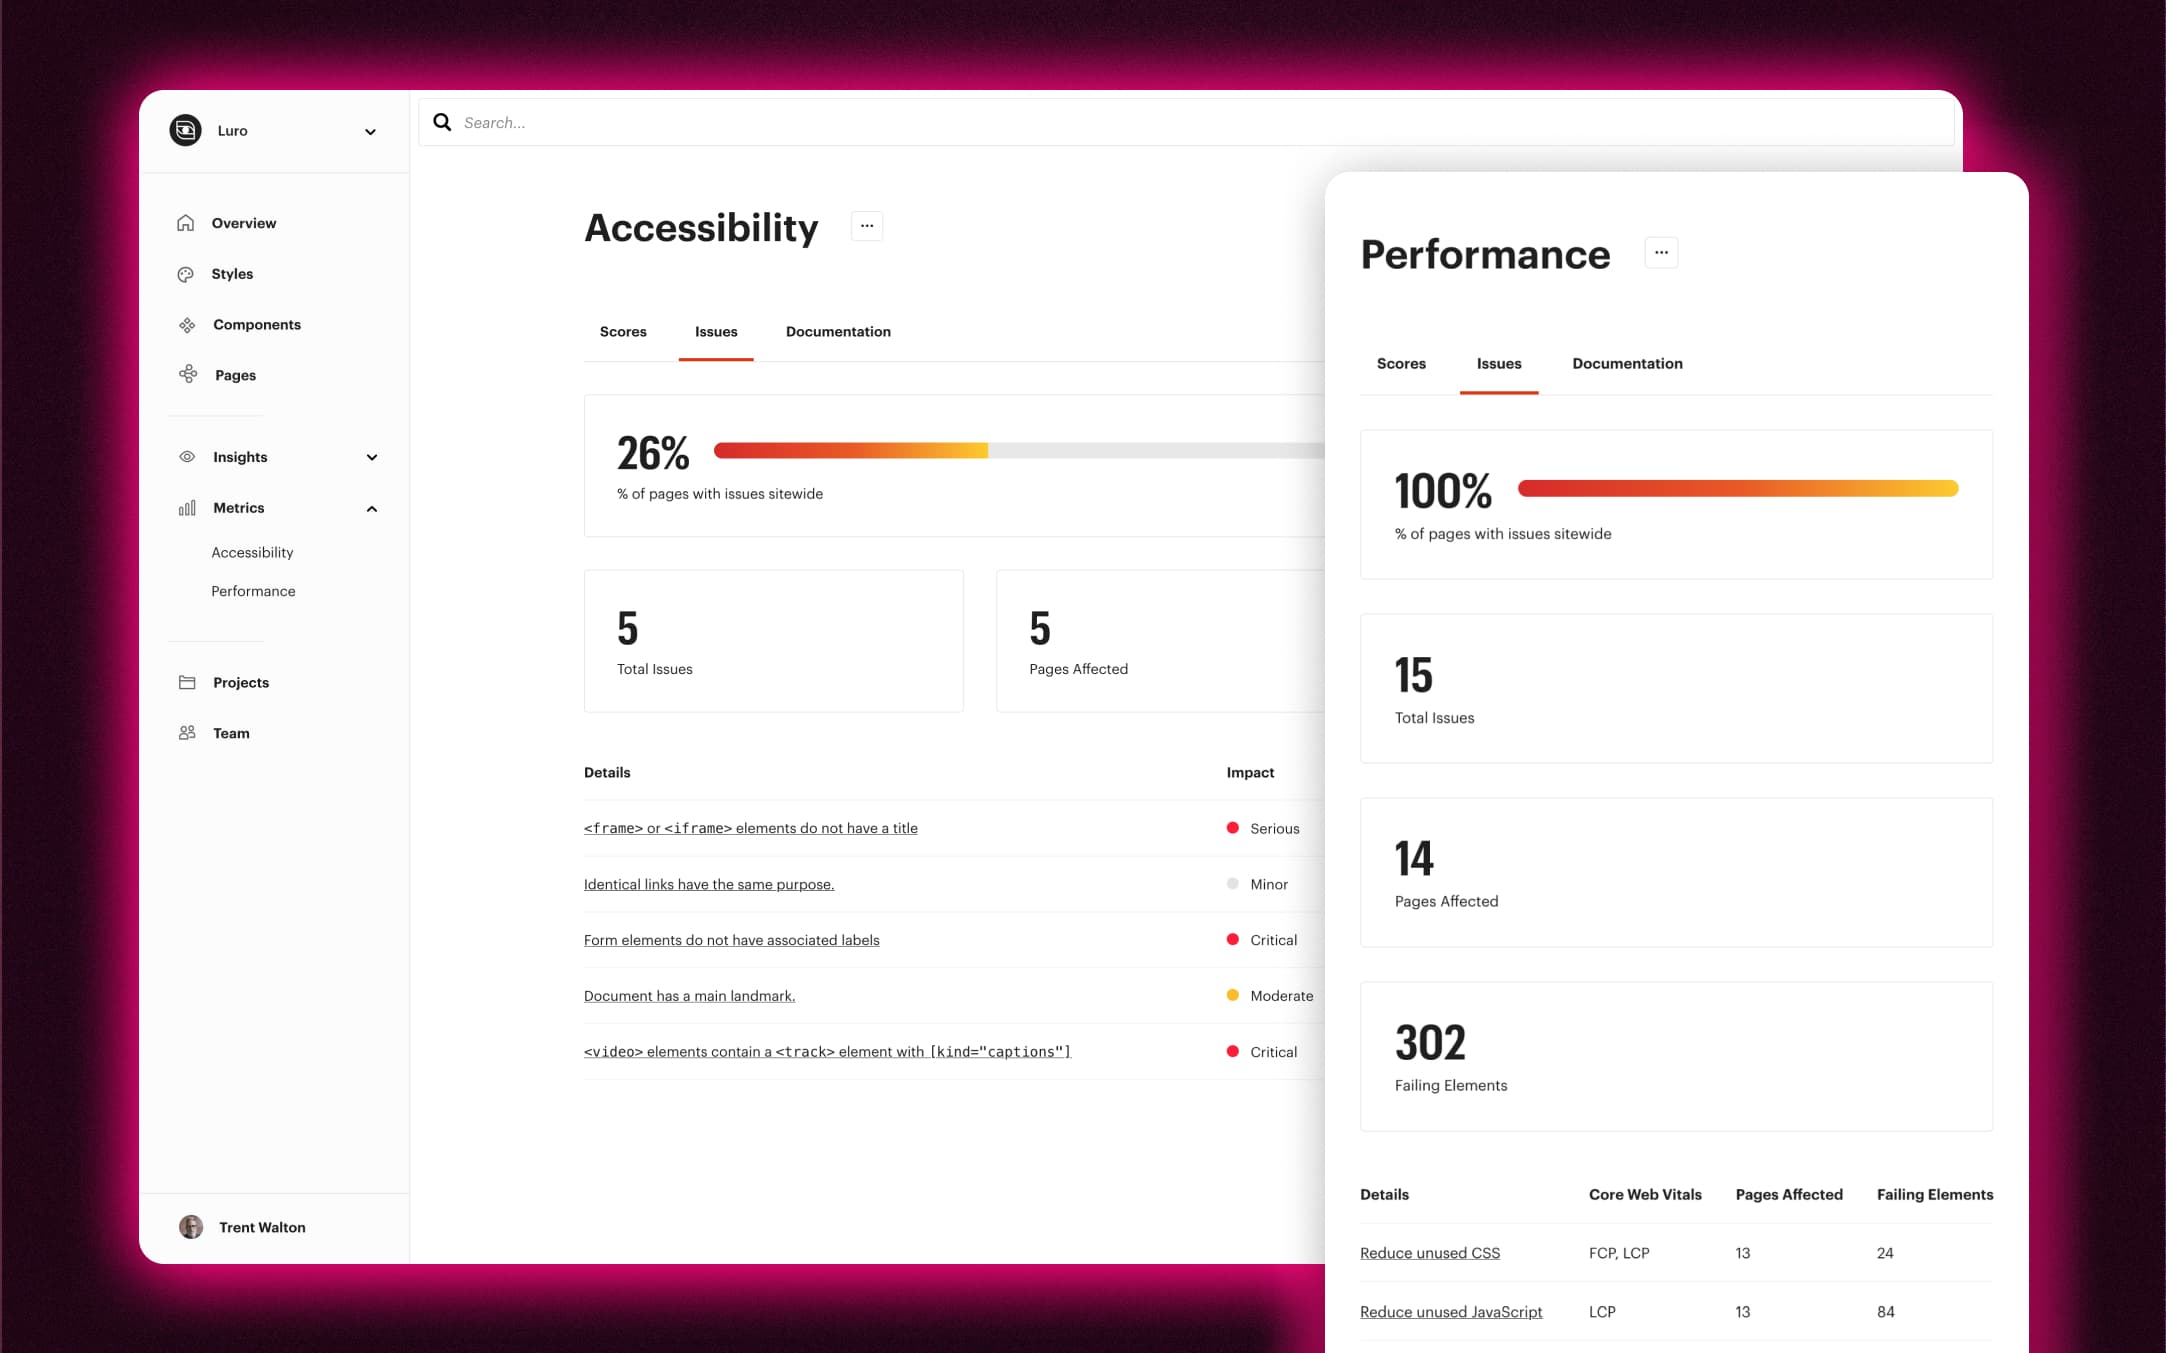 Luro dashboard graphic showing accessibility and performance reporting with sitewide percentage impact and a table of itemized issues below